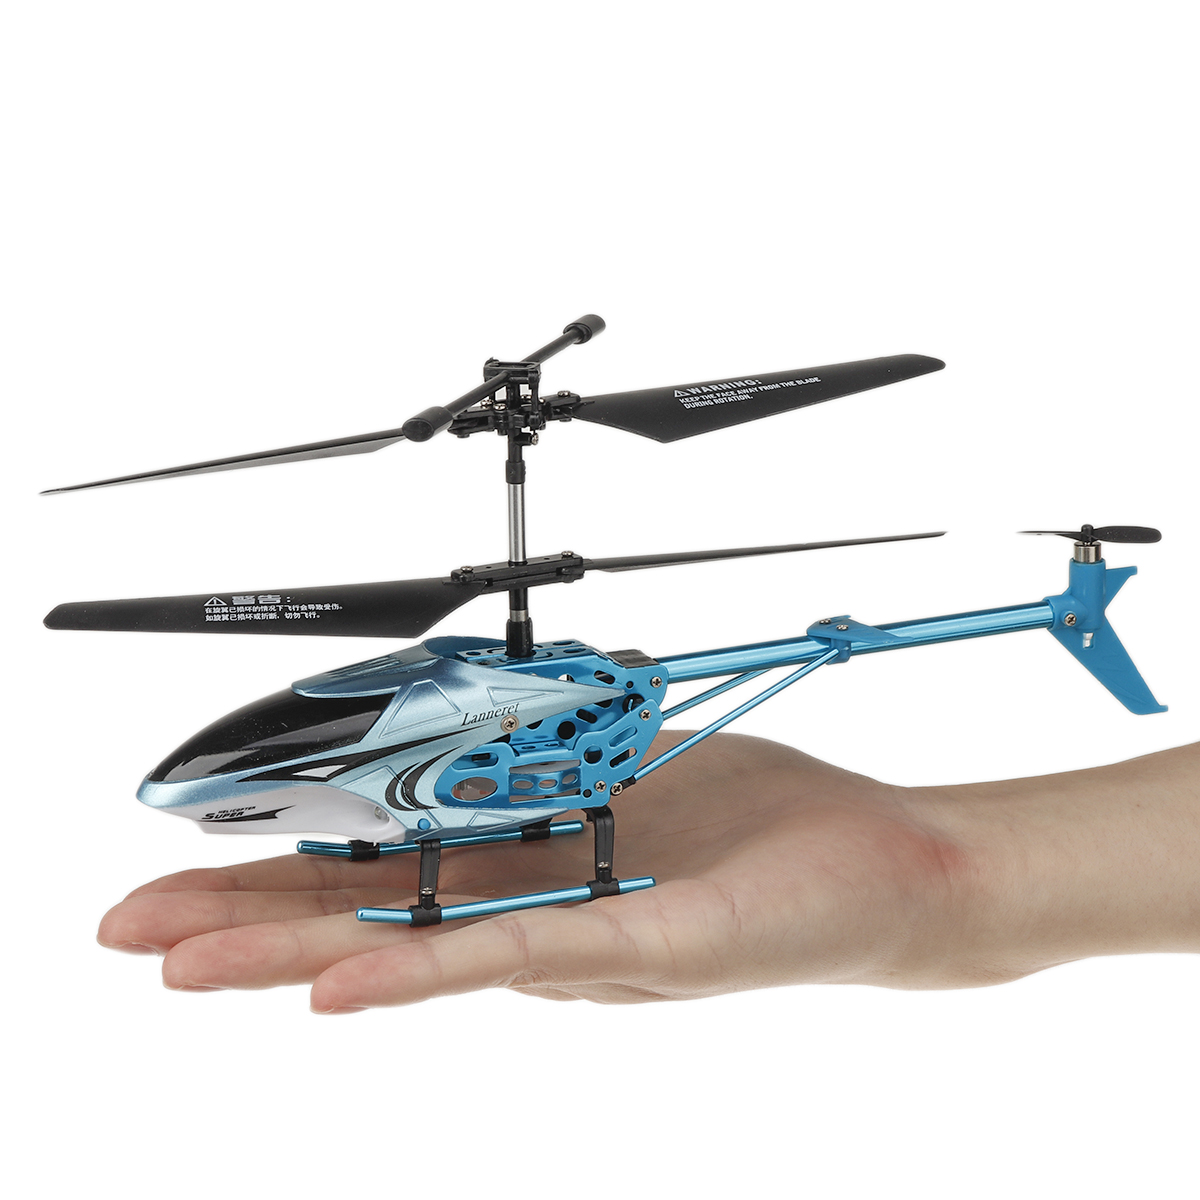 35CH-Alloy-Fall-Resistant-USB-Charging-Lock-tail-Gyroscope-Remote-Control-Helicopter-1846822-1